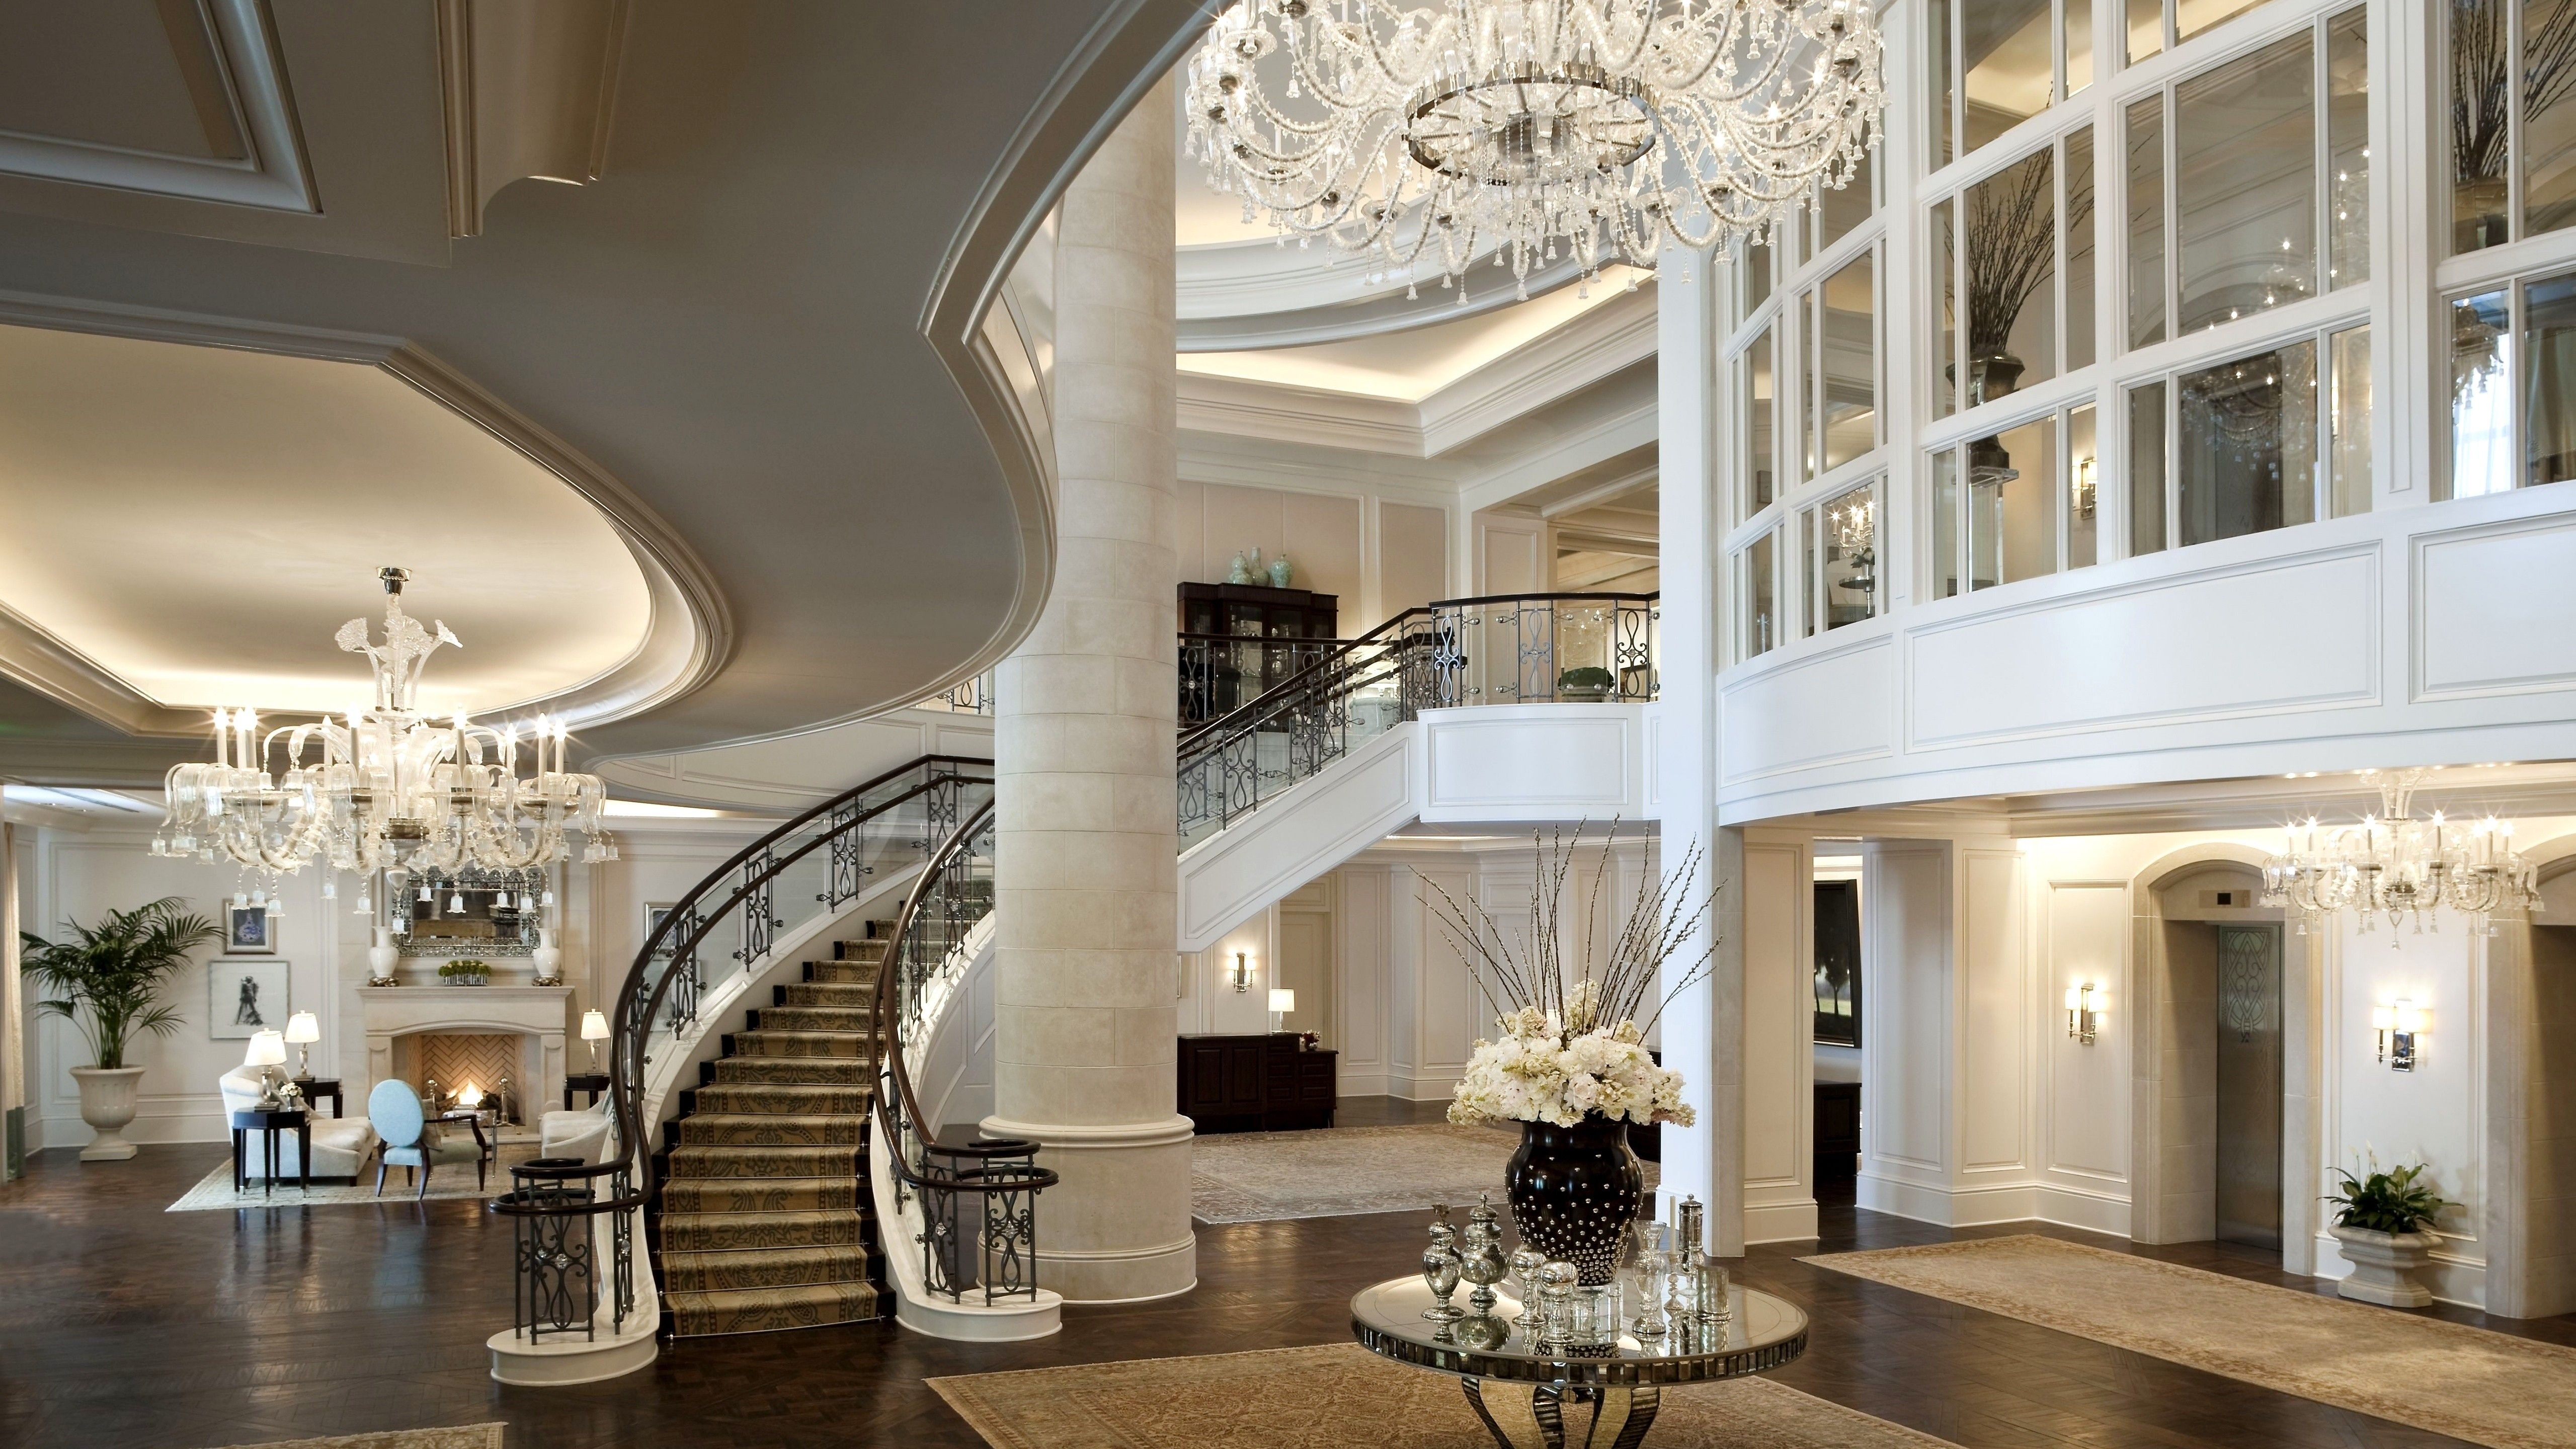 Wallpaper Mandarin Oriental Hotel, classical, white, rich, castle, inside, stairs, room, living room, fire, comfort, place, Architecture